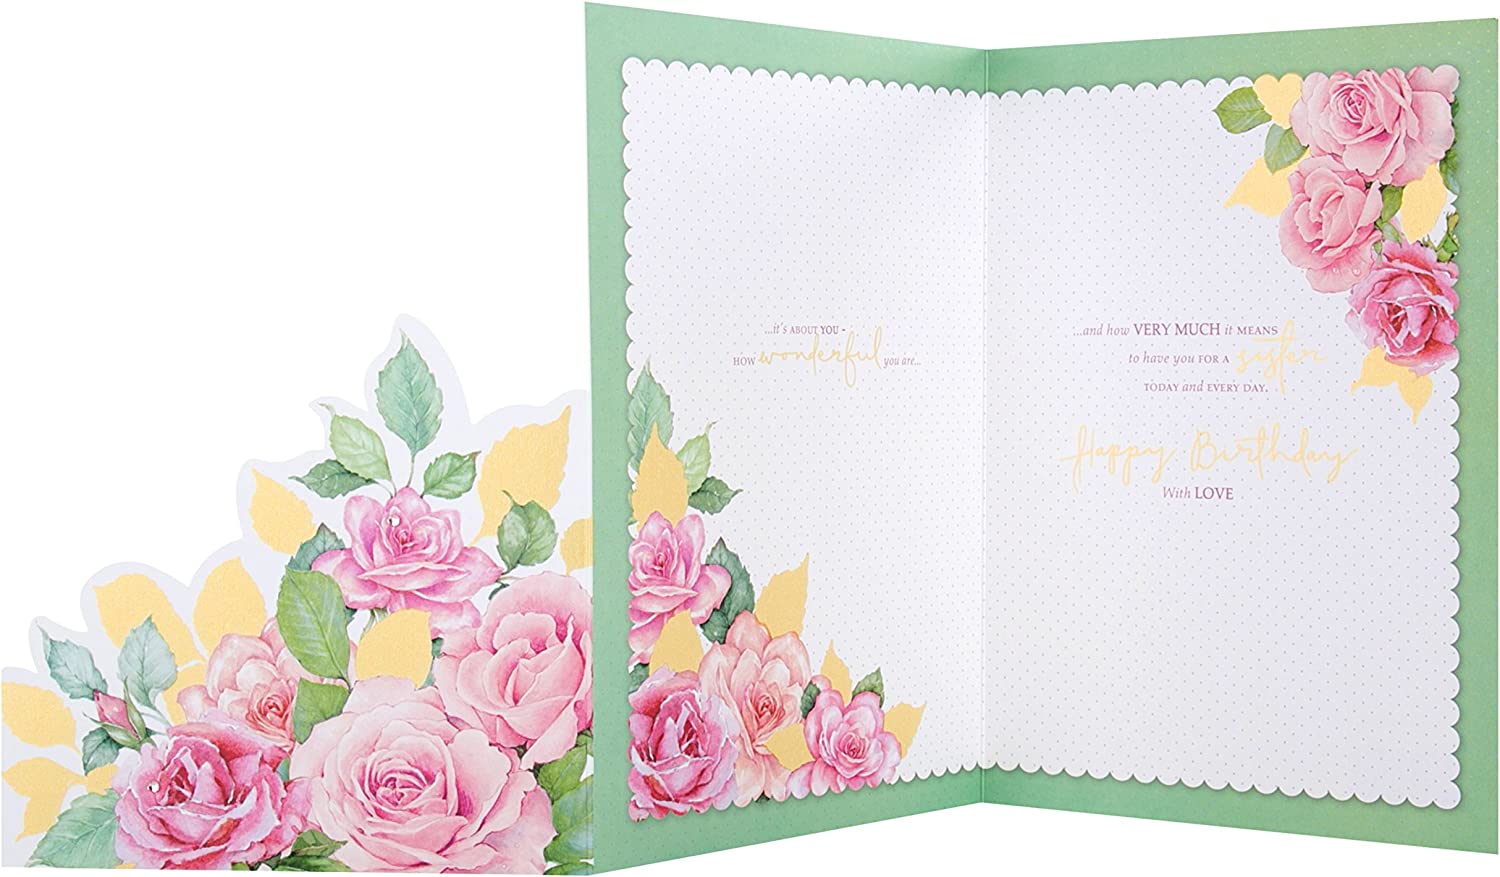 Sister Birthday Card - In Gratitude And Admiration - Floral Die Cut Card